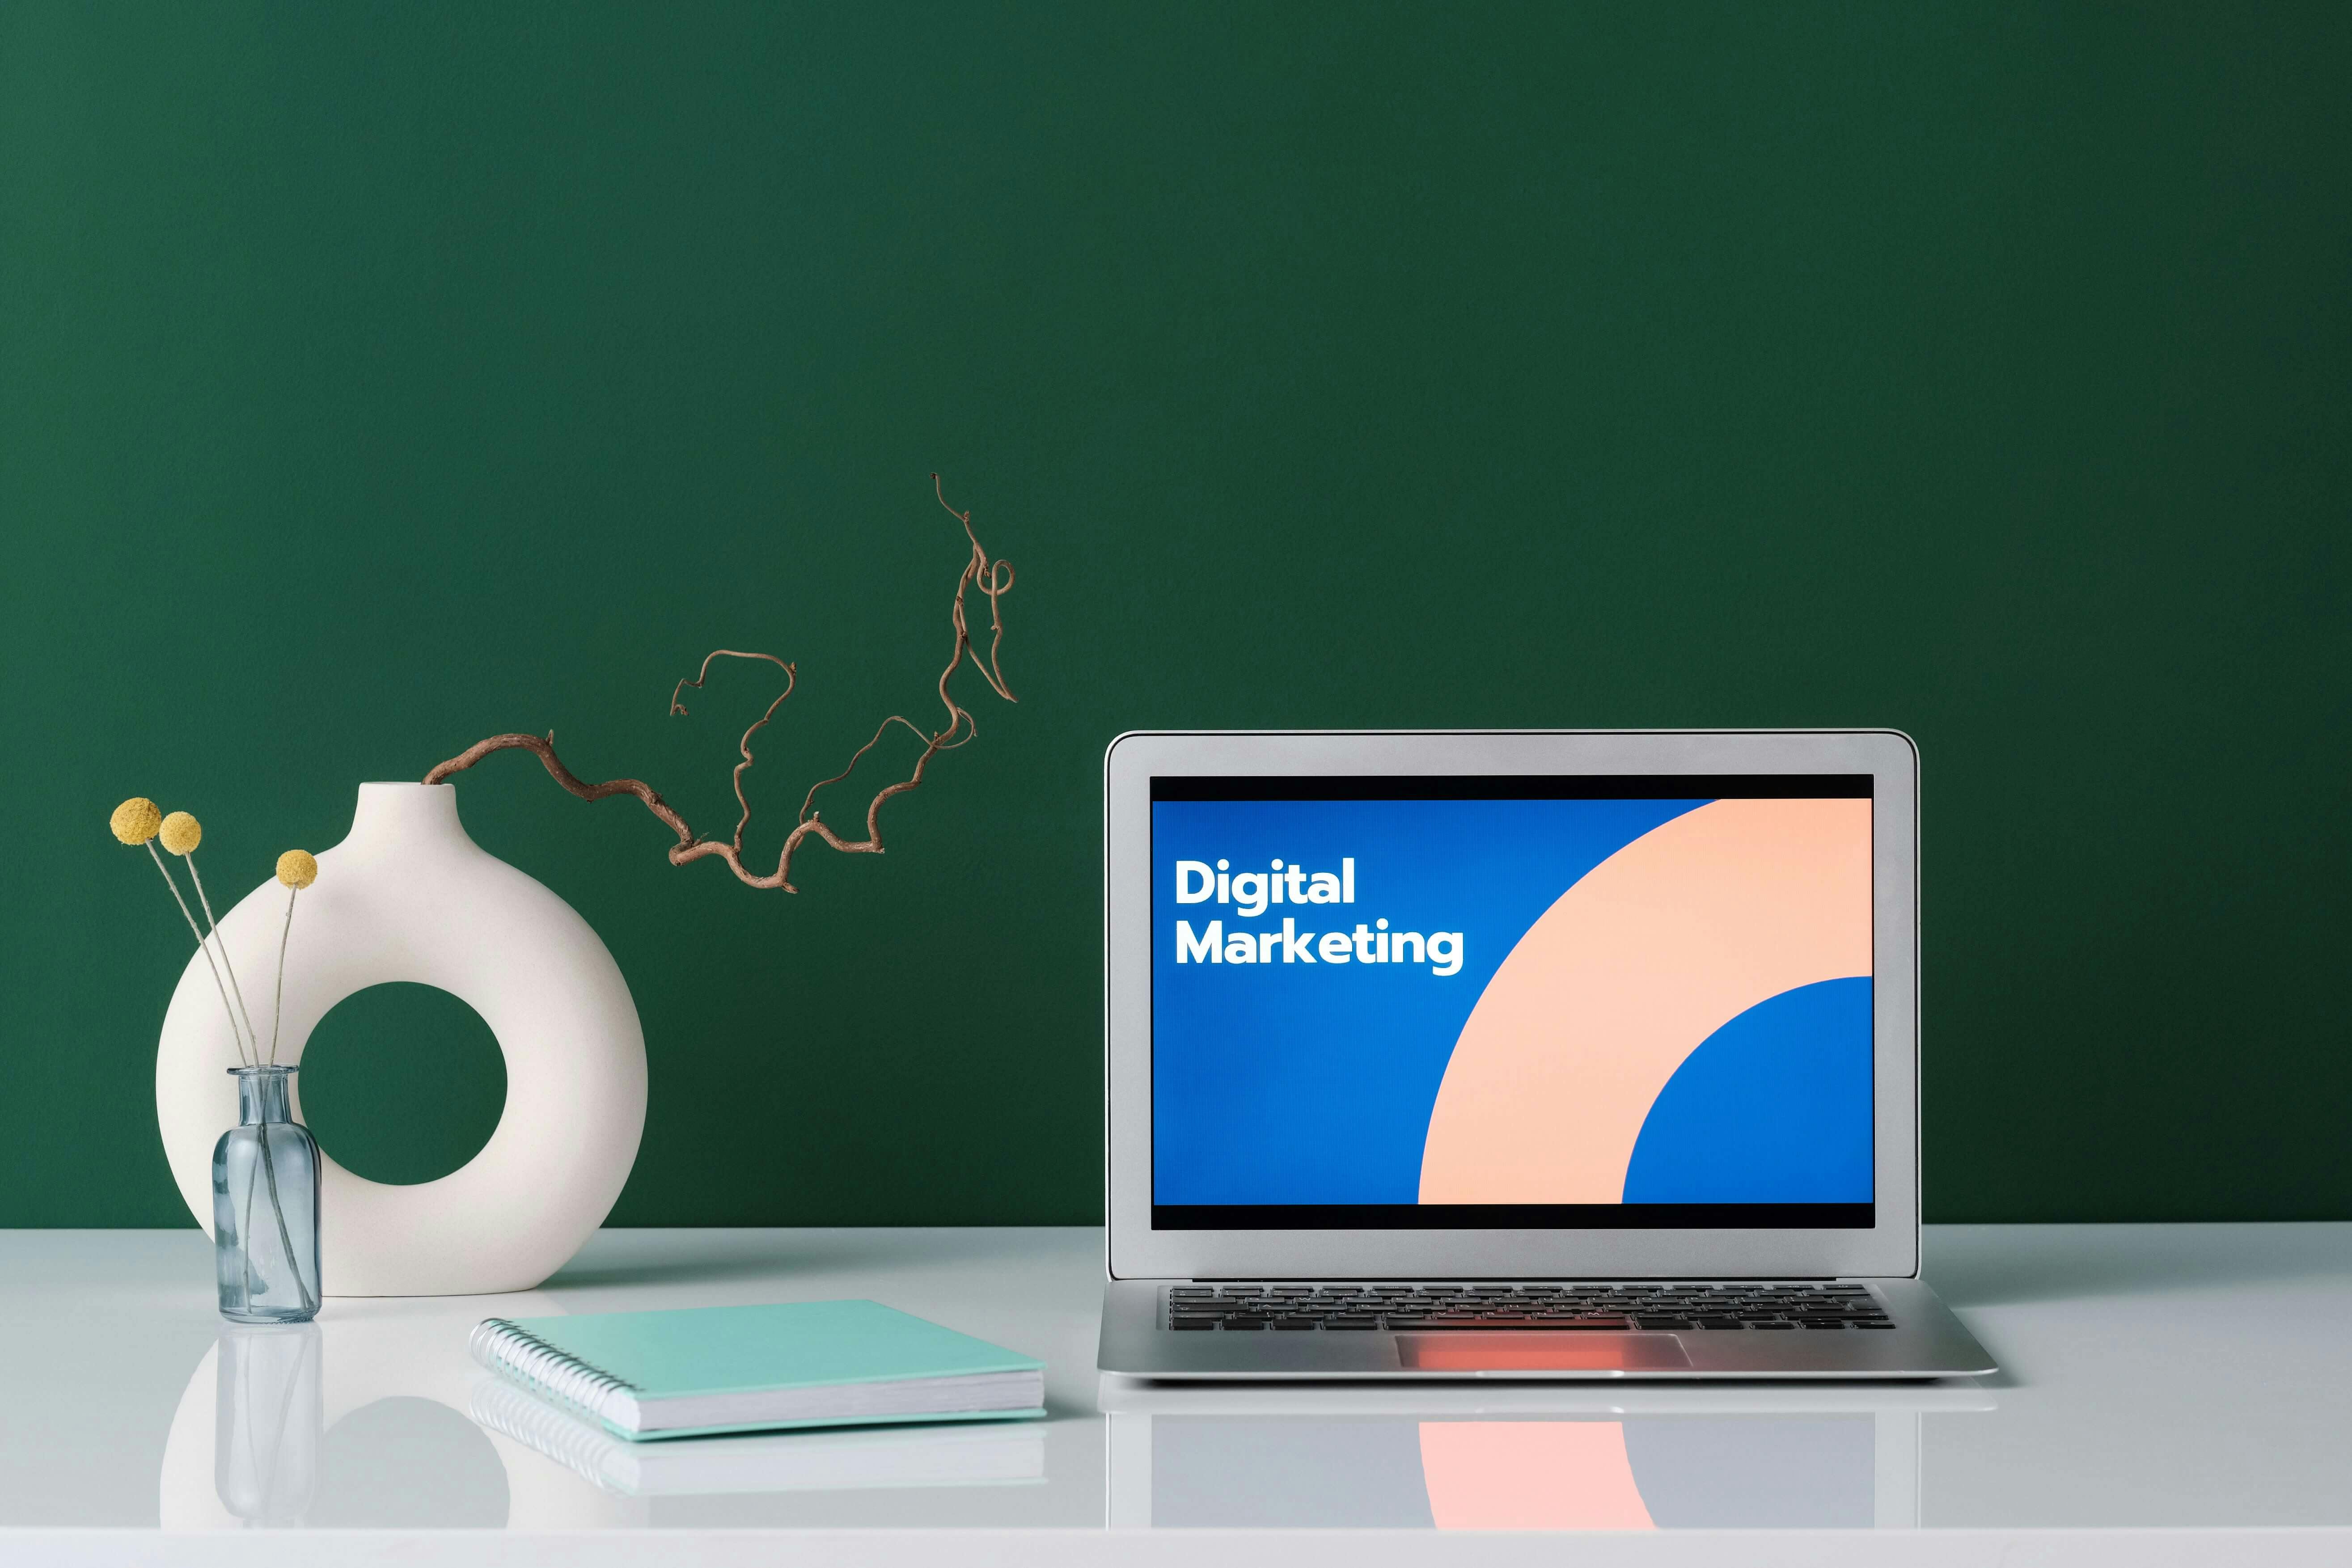 Off the Shelf Elearning Courses - Complete Digital Marketing Basic Courses in 1 by Skillshare